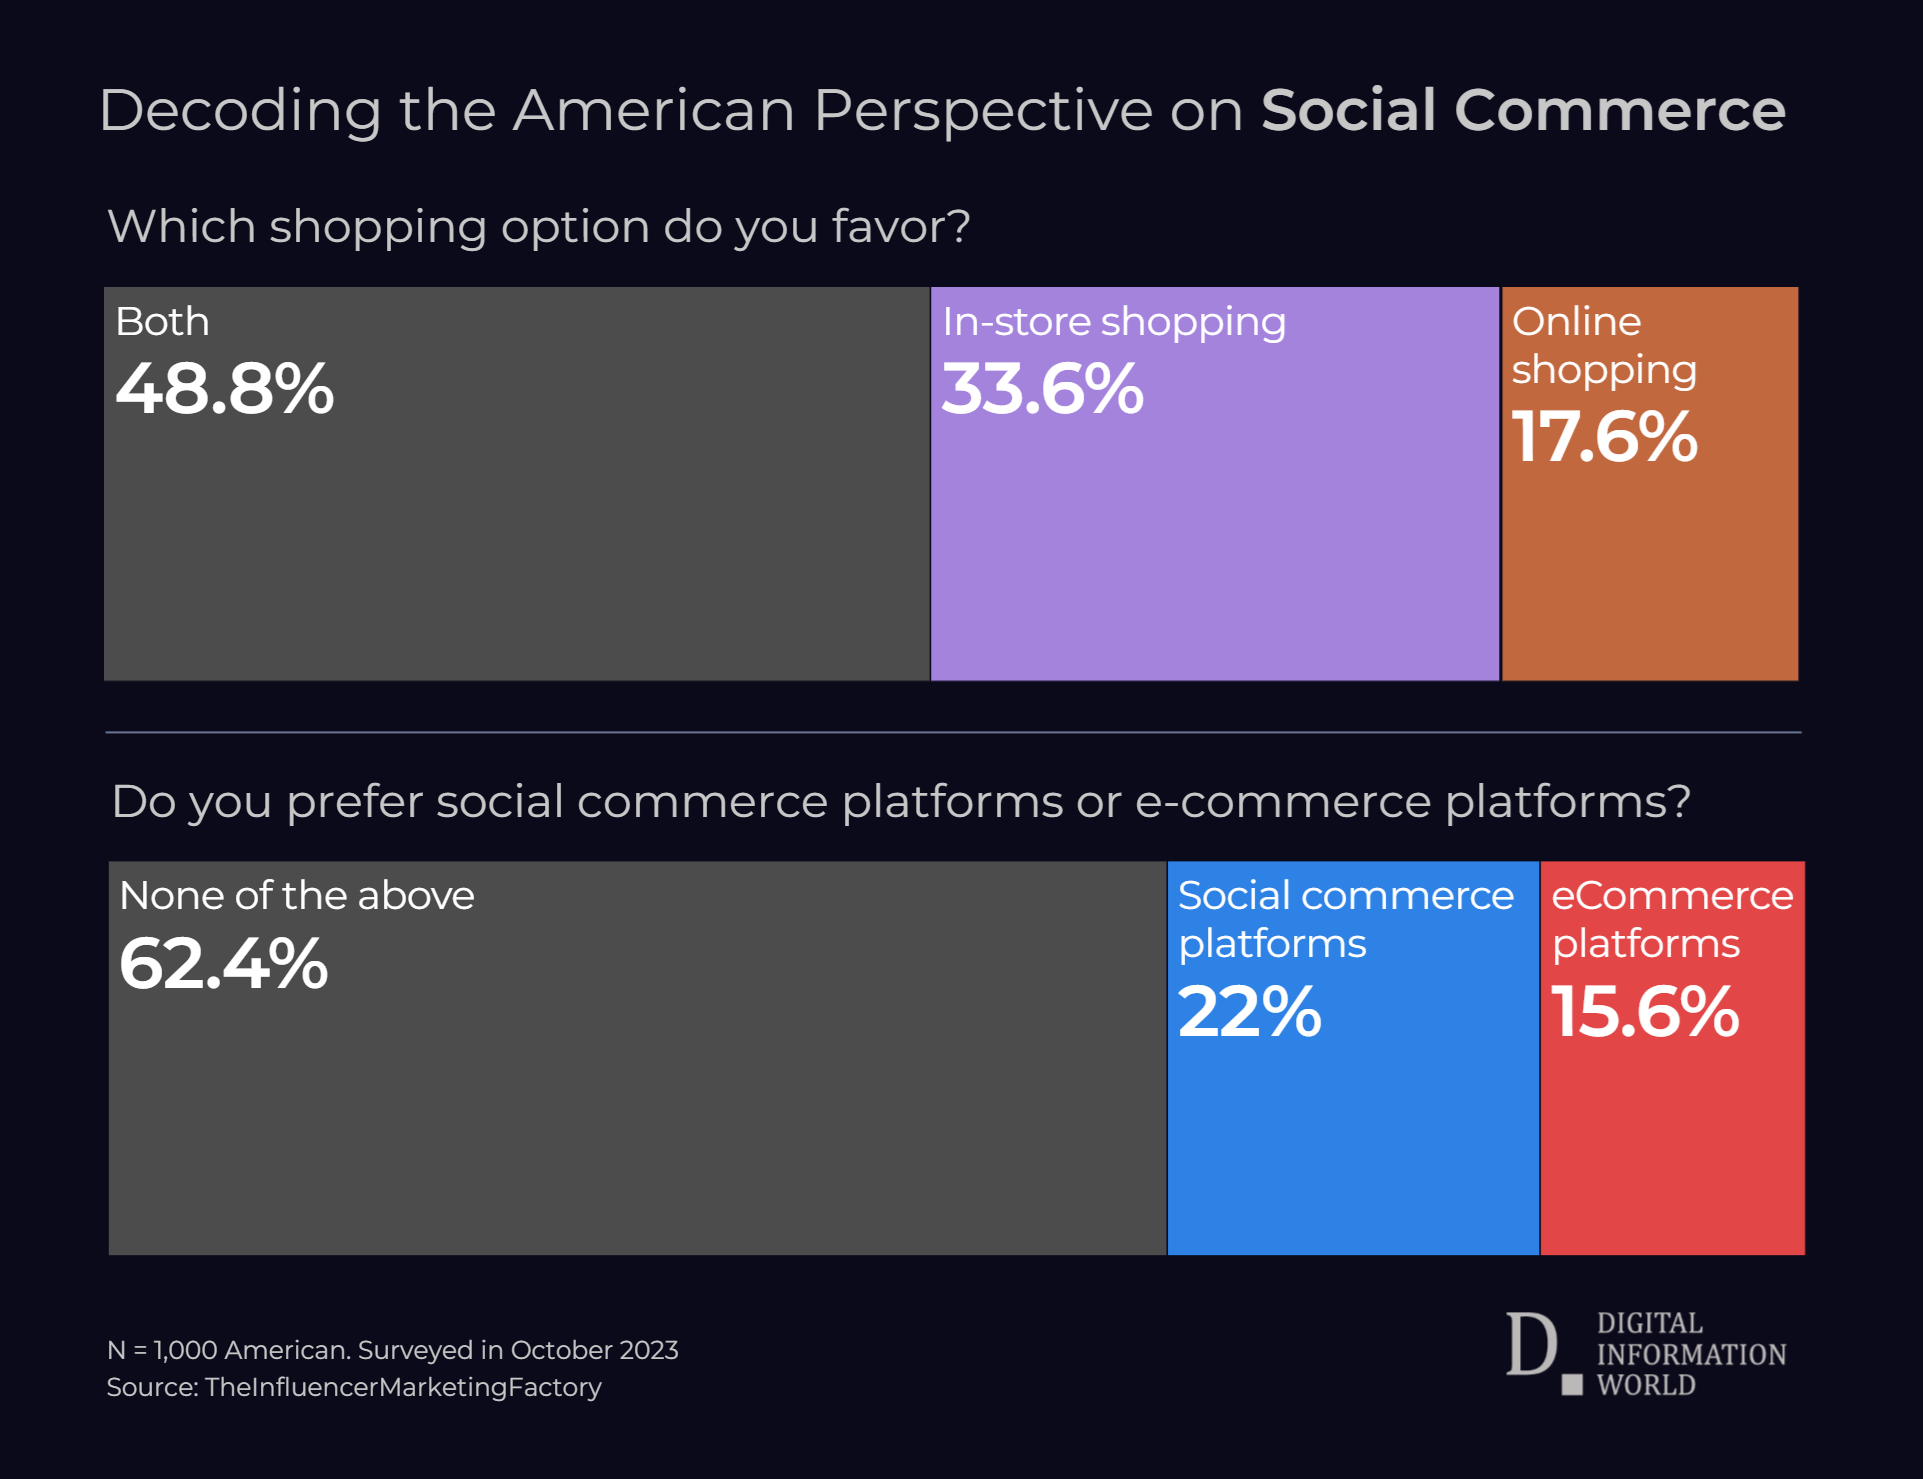 A New Survey Shows that Consumers Don't Trust Social Media Apps when it Comes to Online Shopping